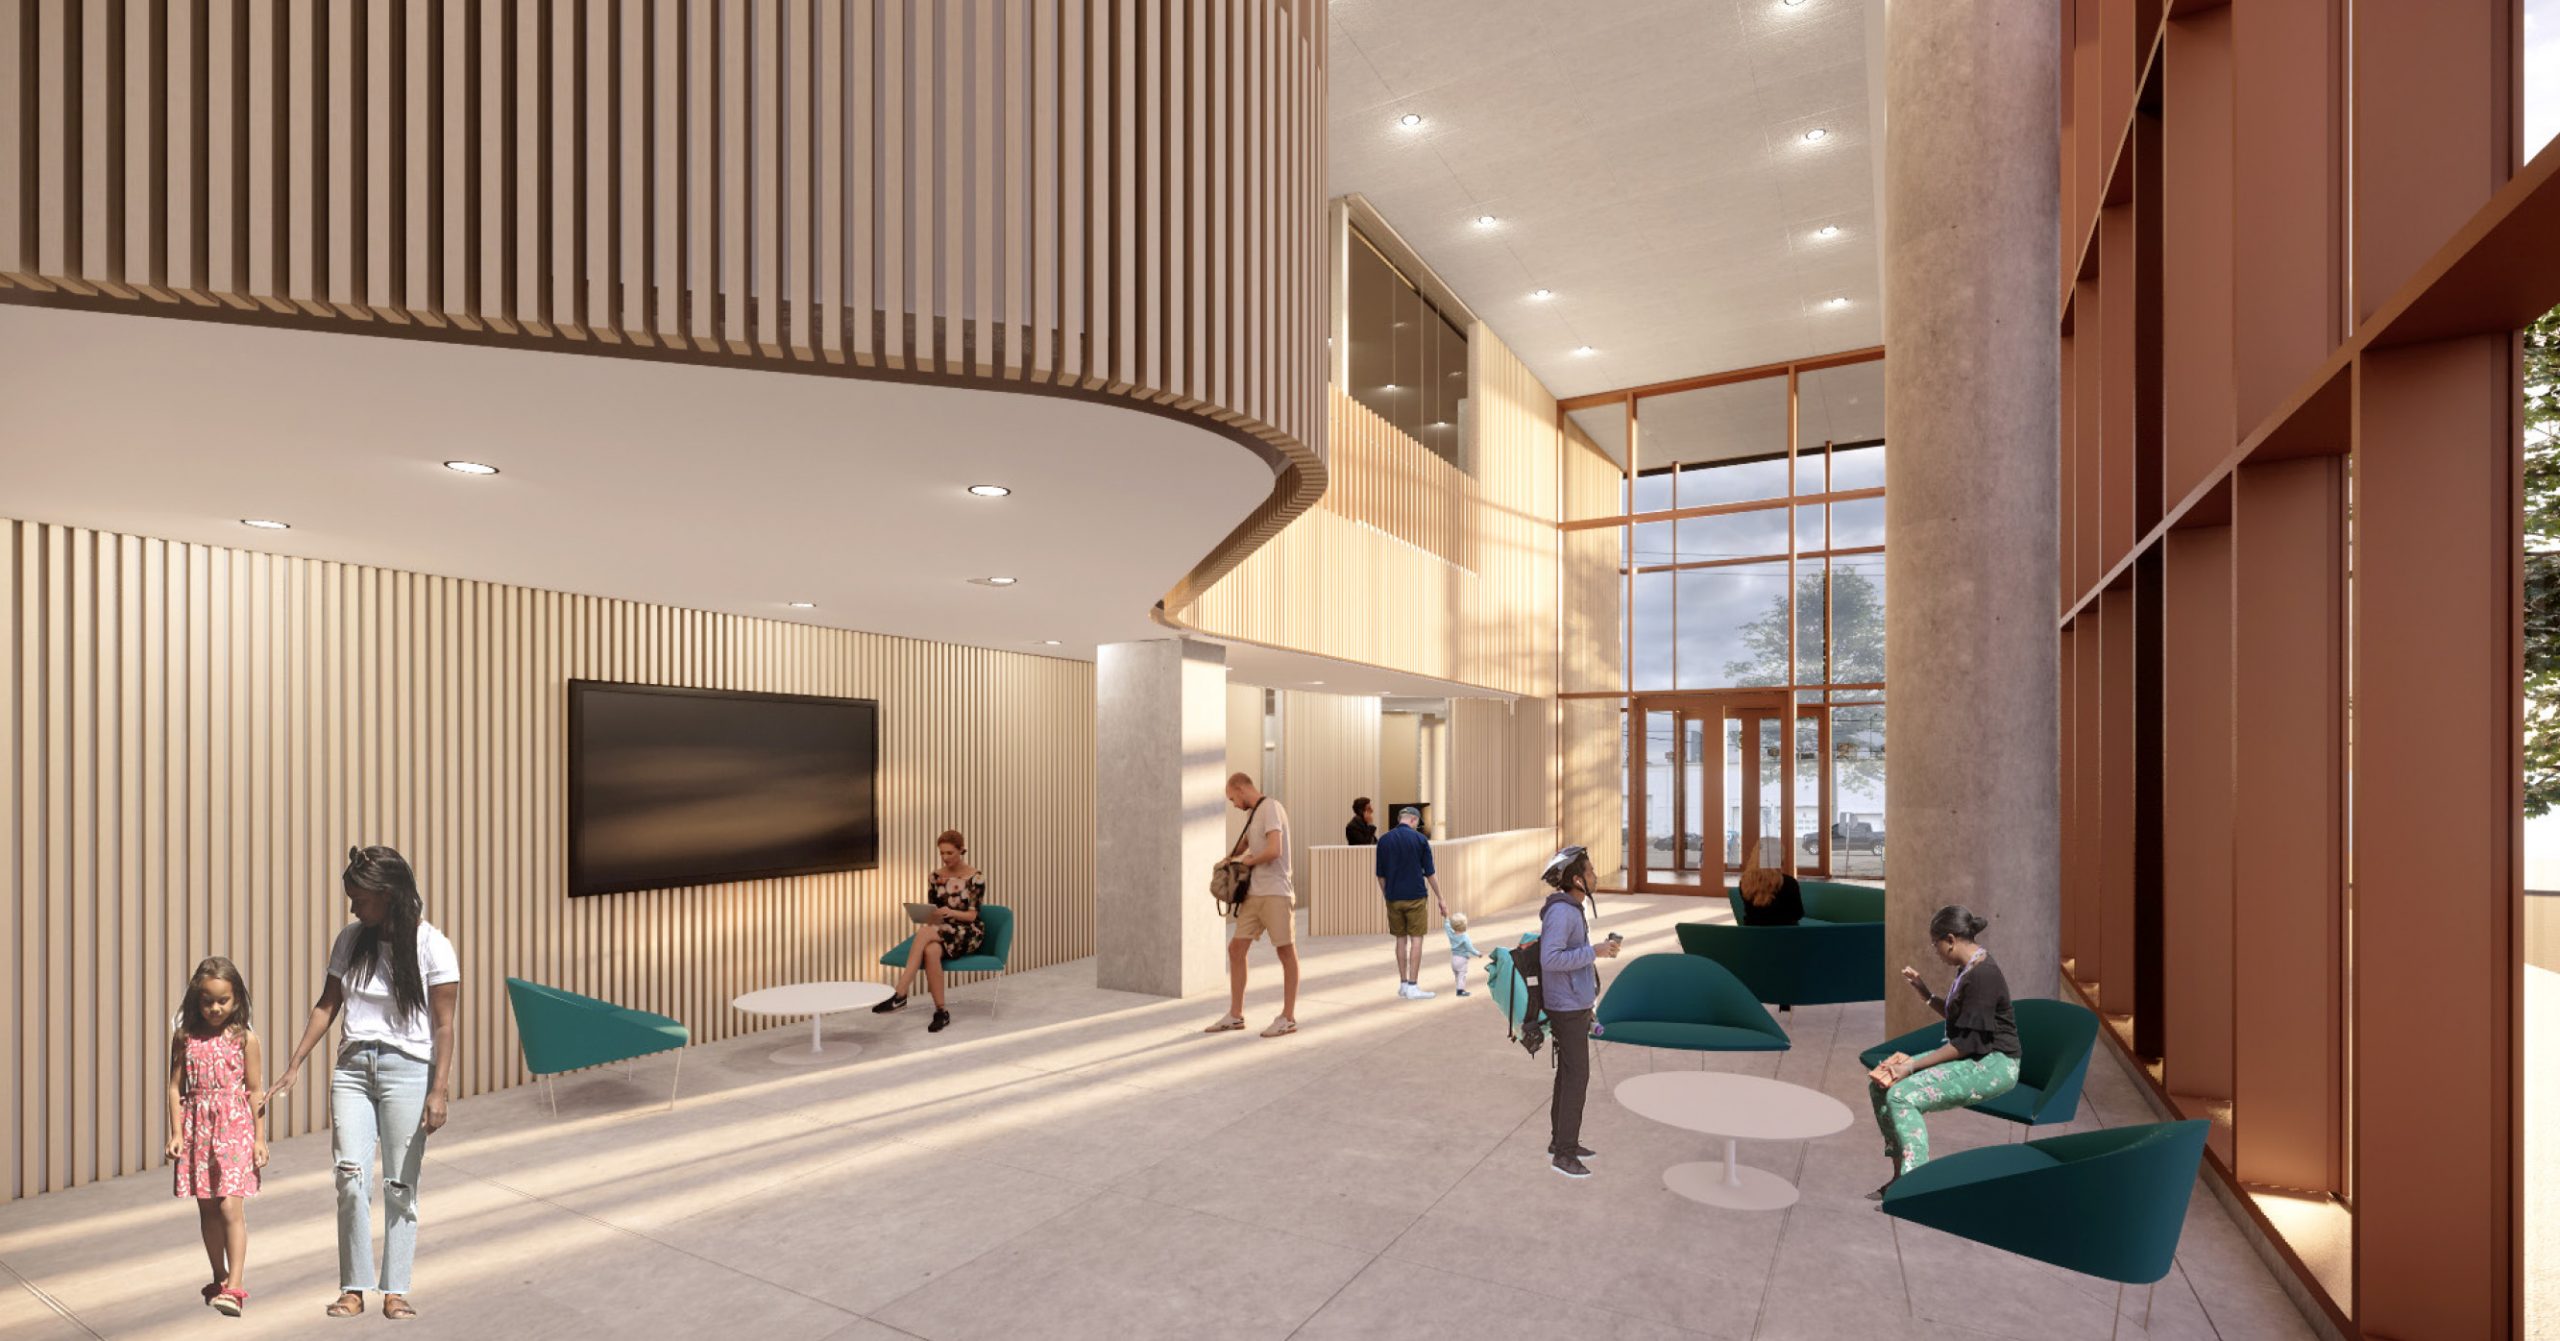 An illustration of the community recreation centre lobby, which shows an open space with seating areas and tables and the reception area and entrance in the distance. The space has large wood panel architectural design features along the inner building walls.